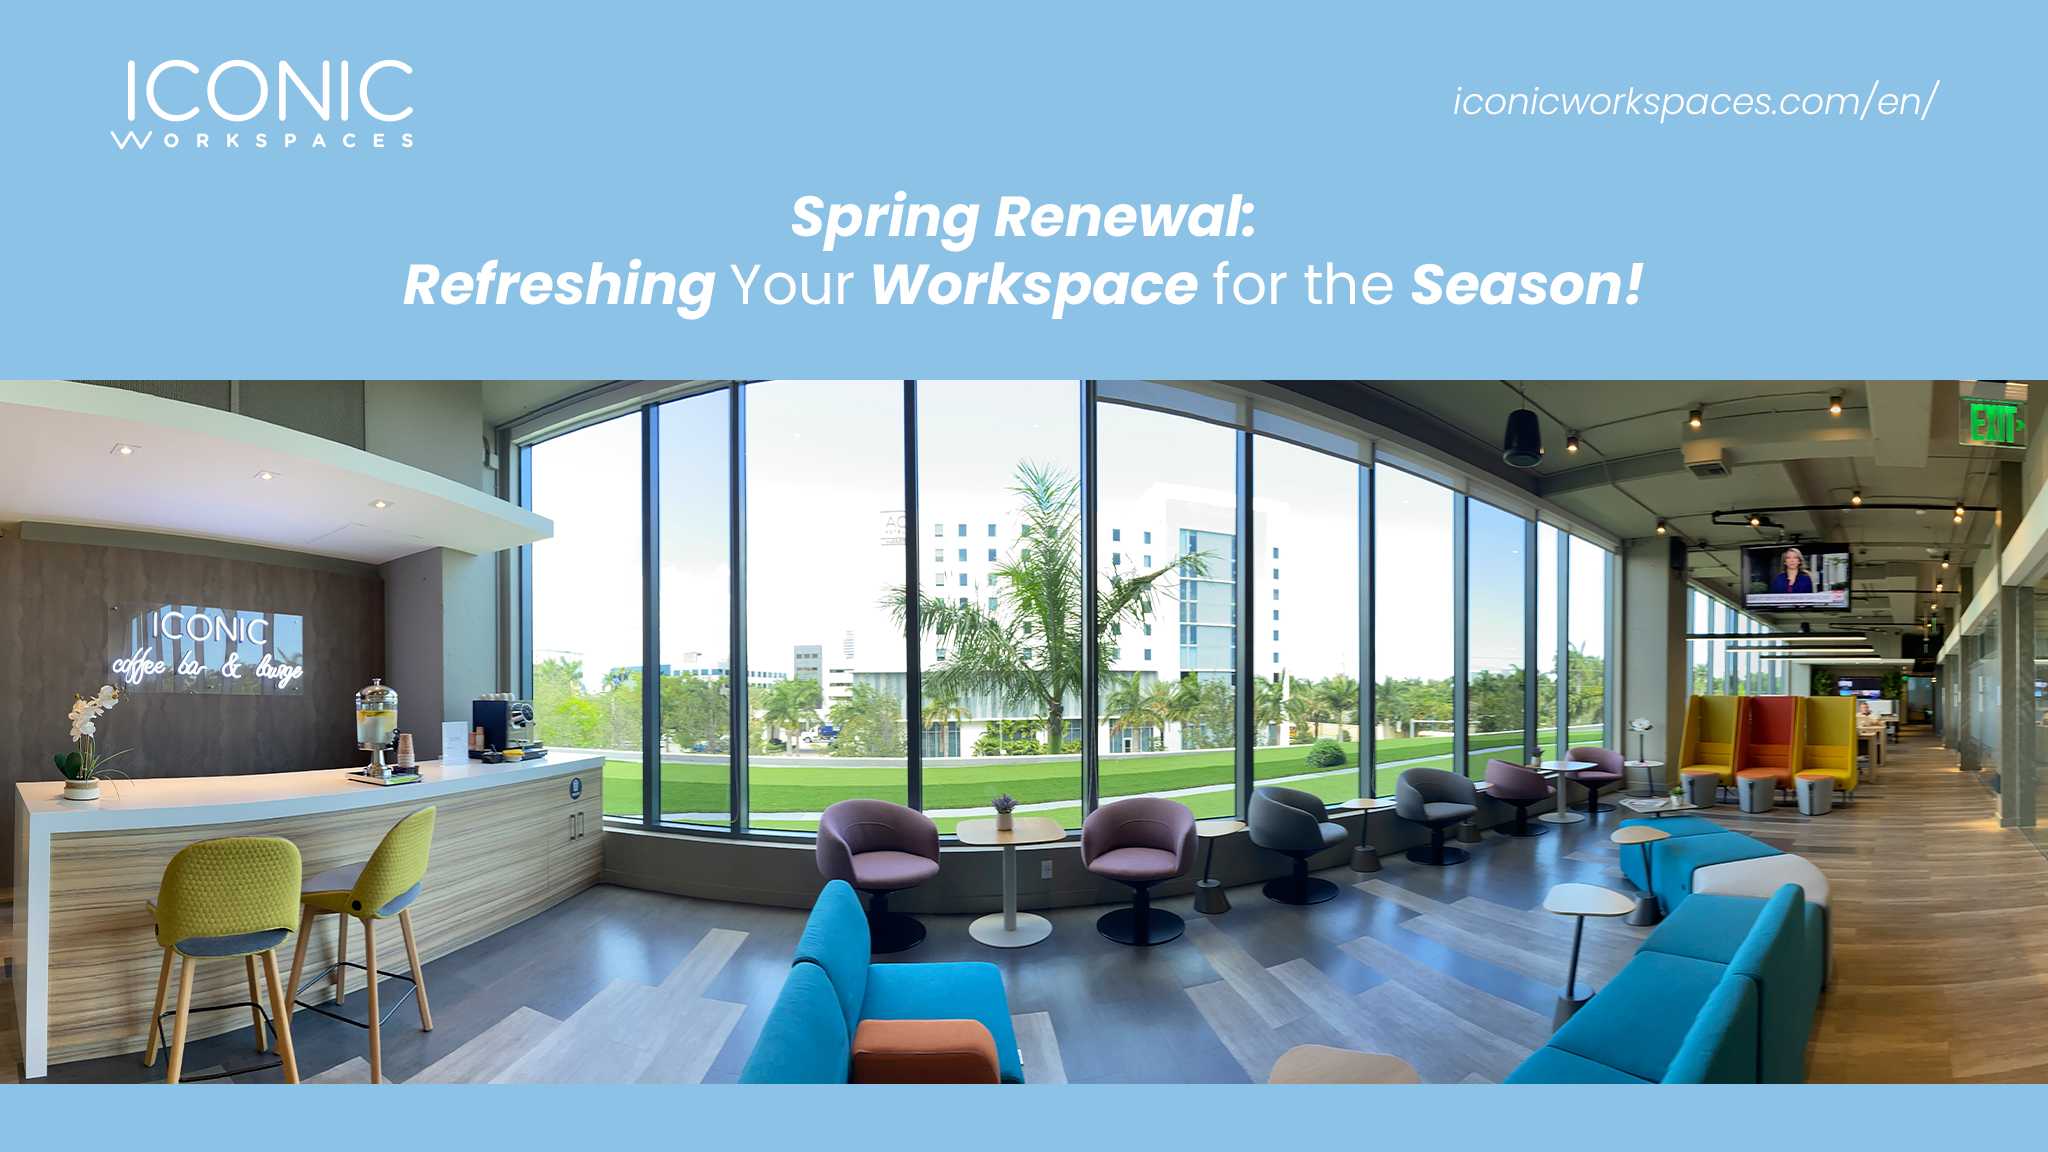 Spring Renewal: Refreshing Your Workspace for the Season